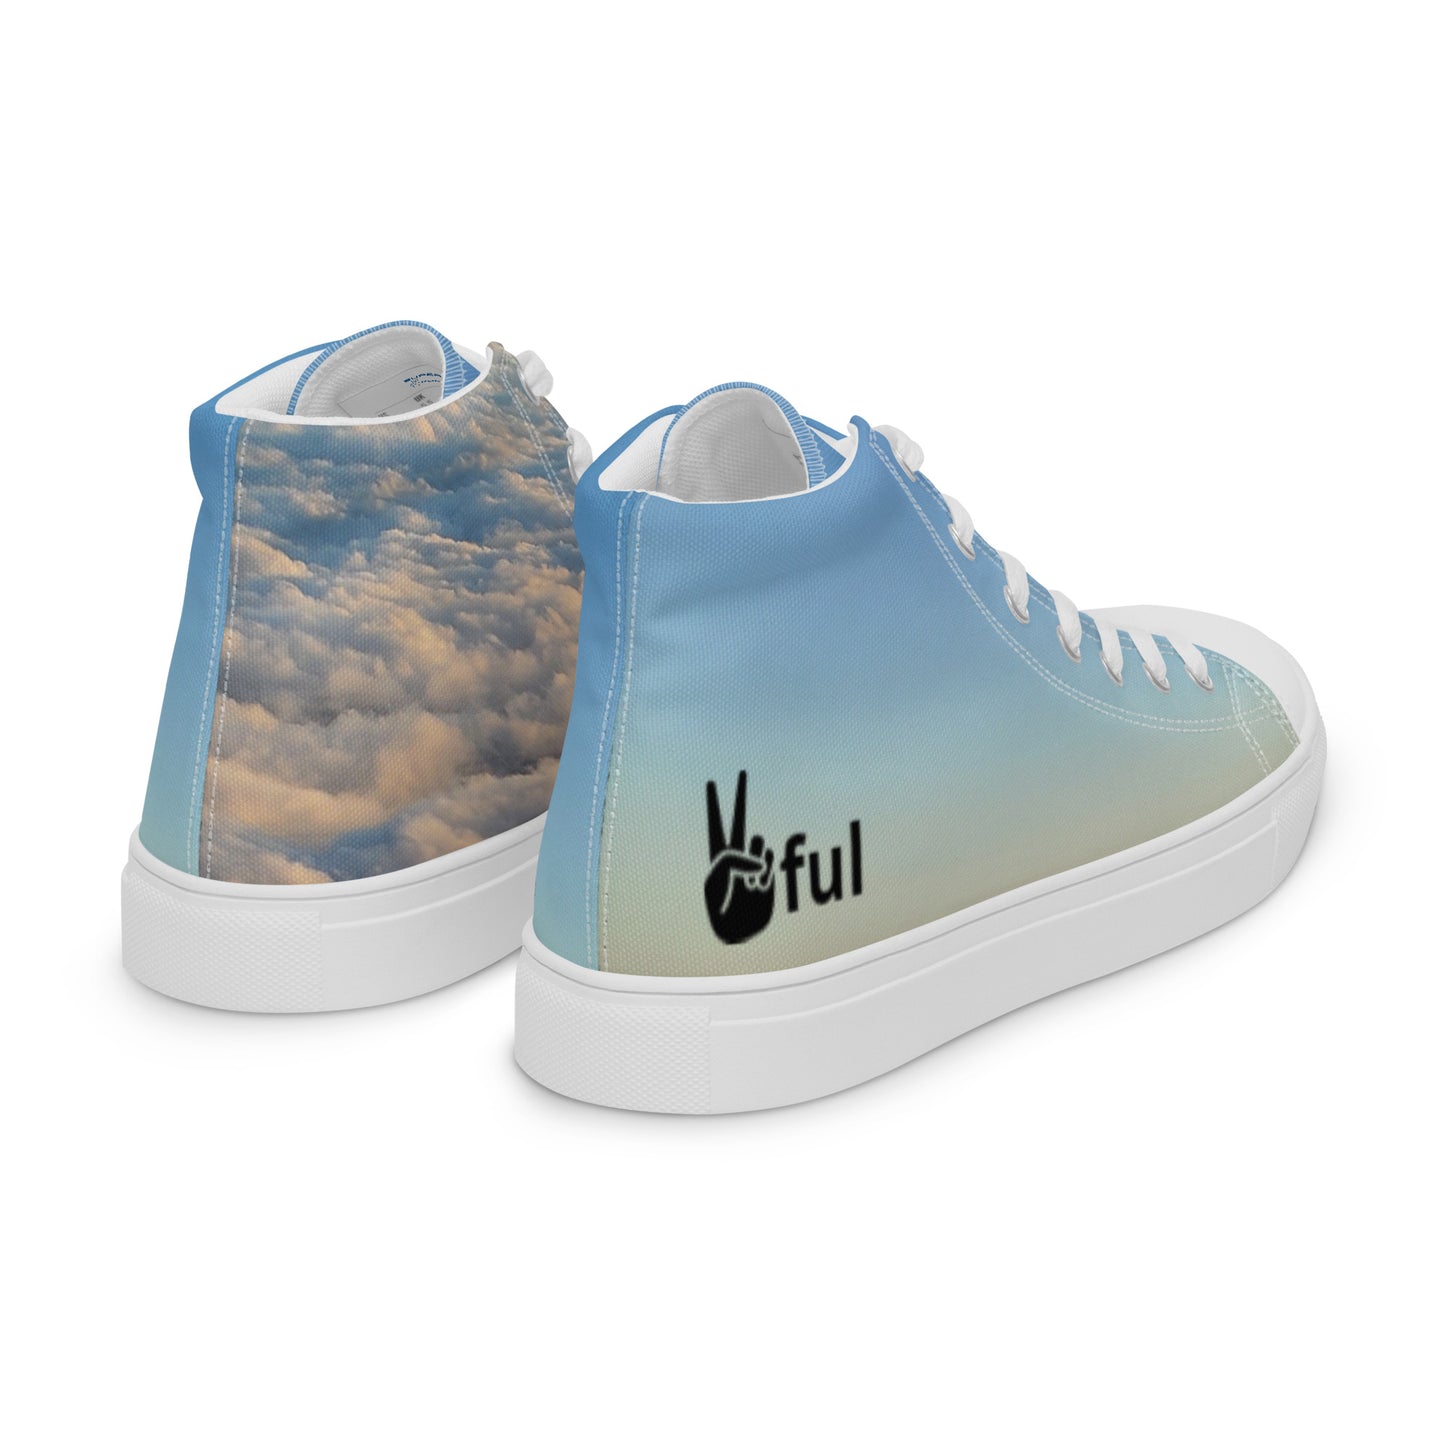 New Heights ✌️ful / Peaceful Shoes